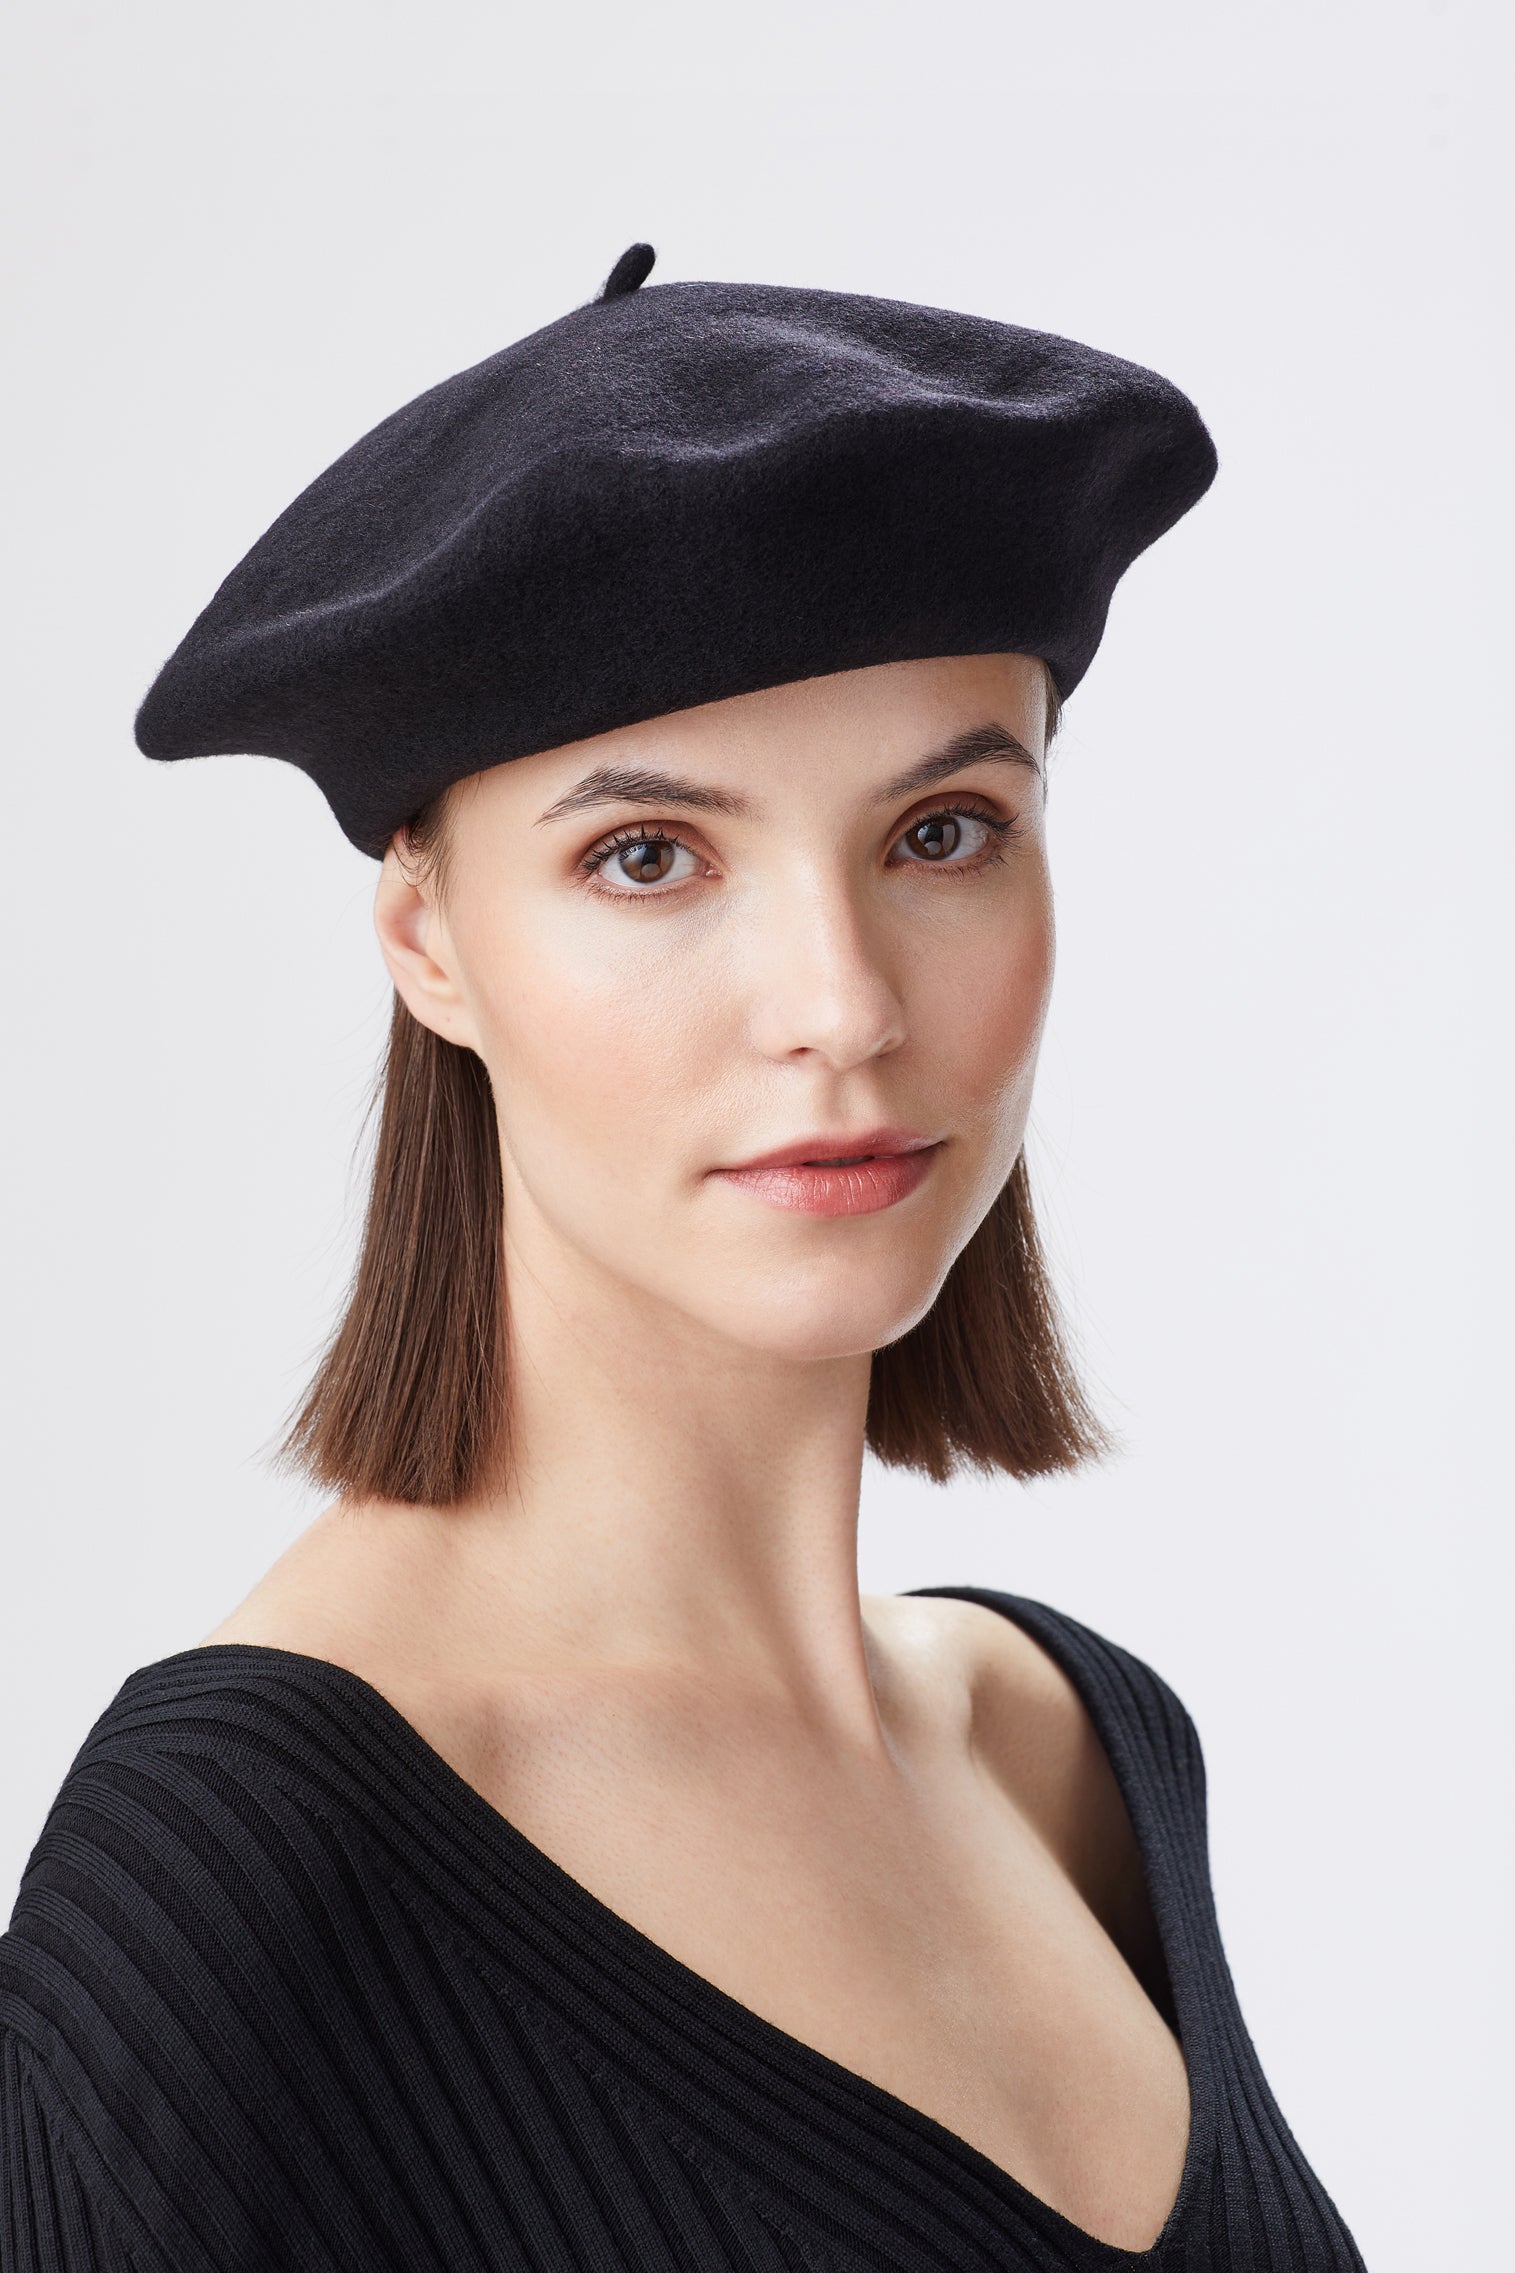 French Beret - All Ready to Wear - Lock & Co. Hatters London UK